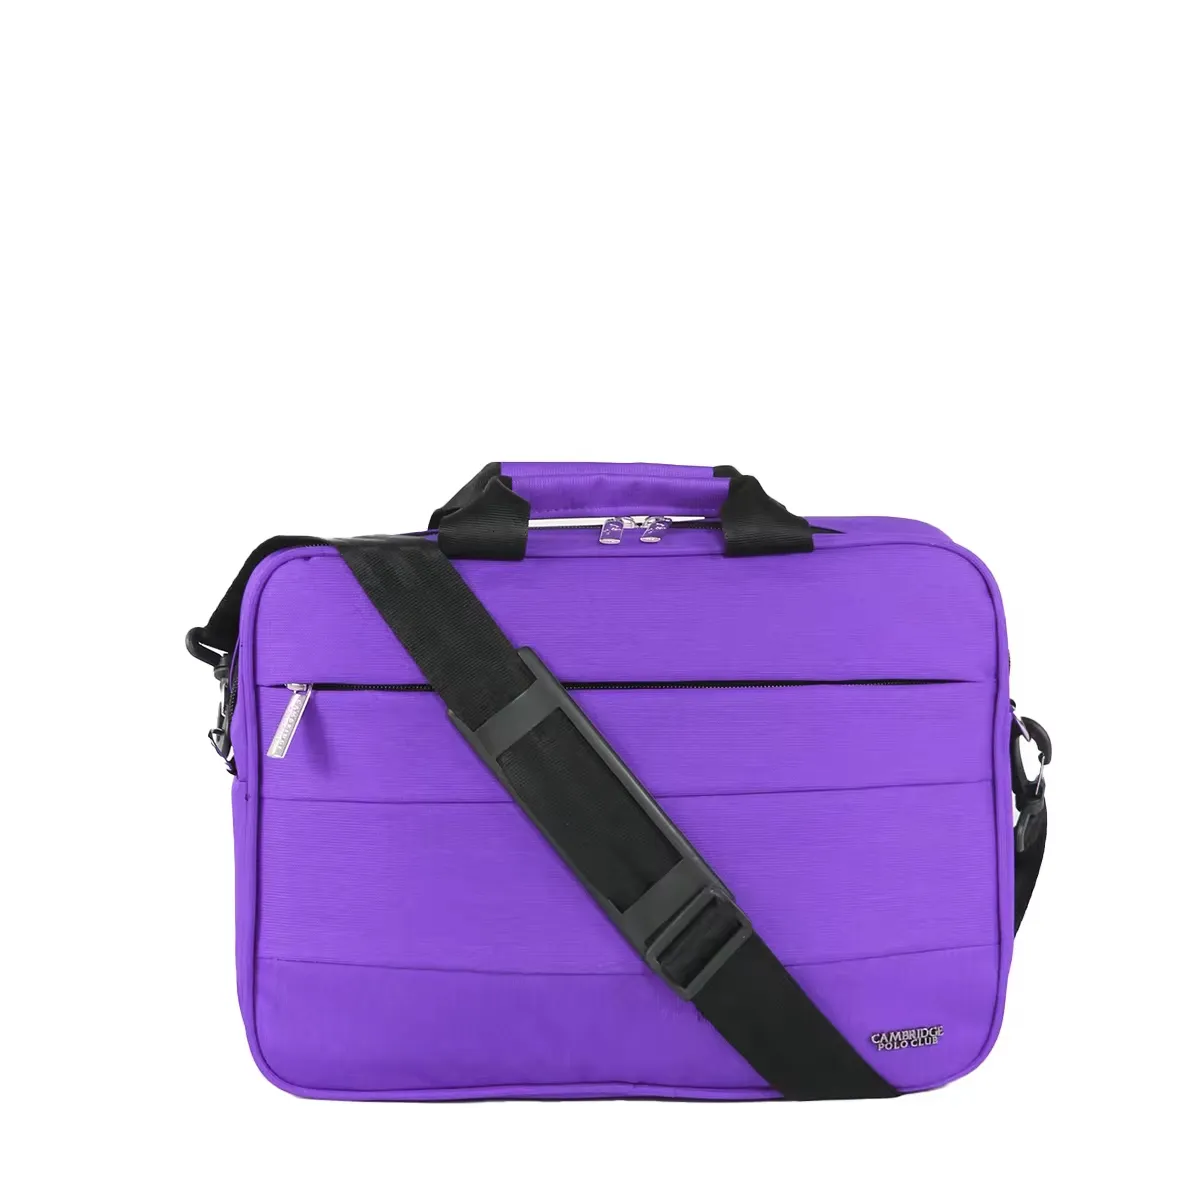 Purple Stylish Fabric Laptop and Document Bag with Zippered Pockets and Adjustable Detachable Strap High Quality Briefcase